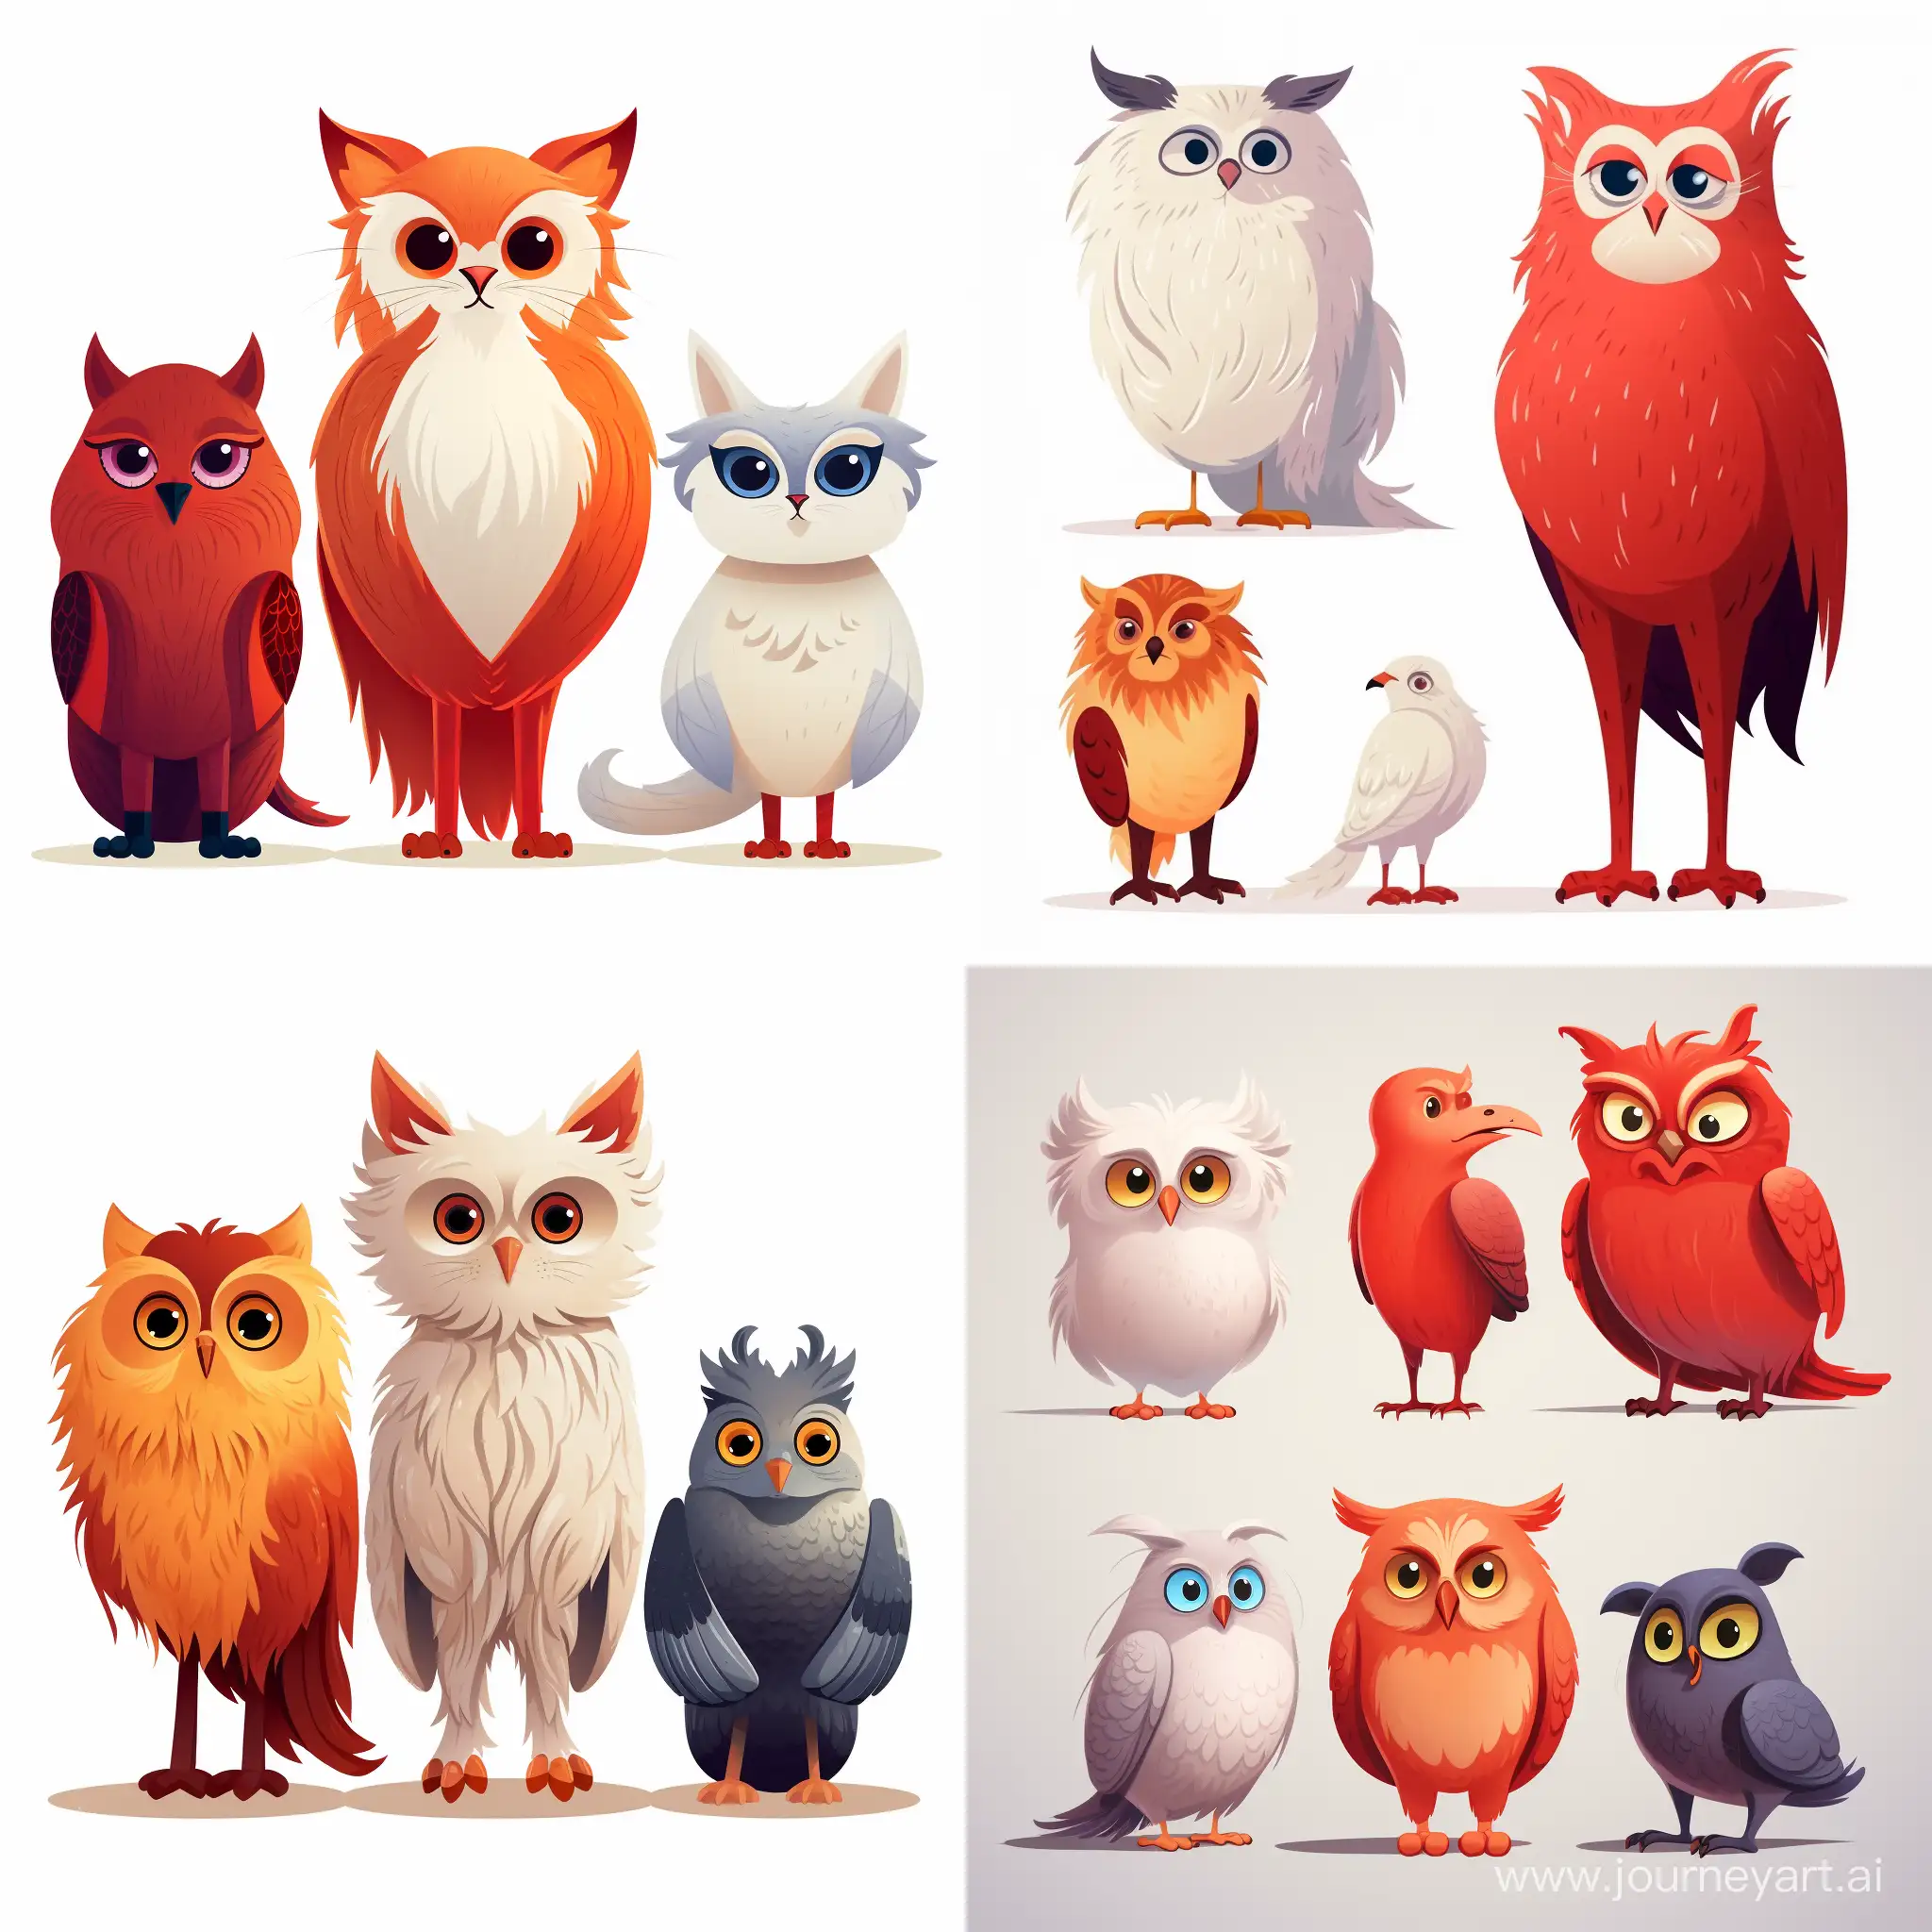 Magical-Creatures-in-Vivid-Cartoon-Style-Hedwig-Scabbers-and-Crookshanks-on-a-Snowy-Canvas